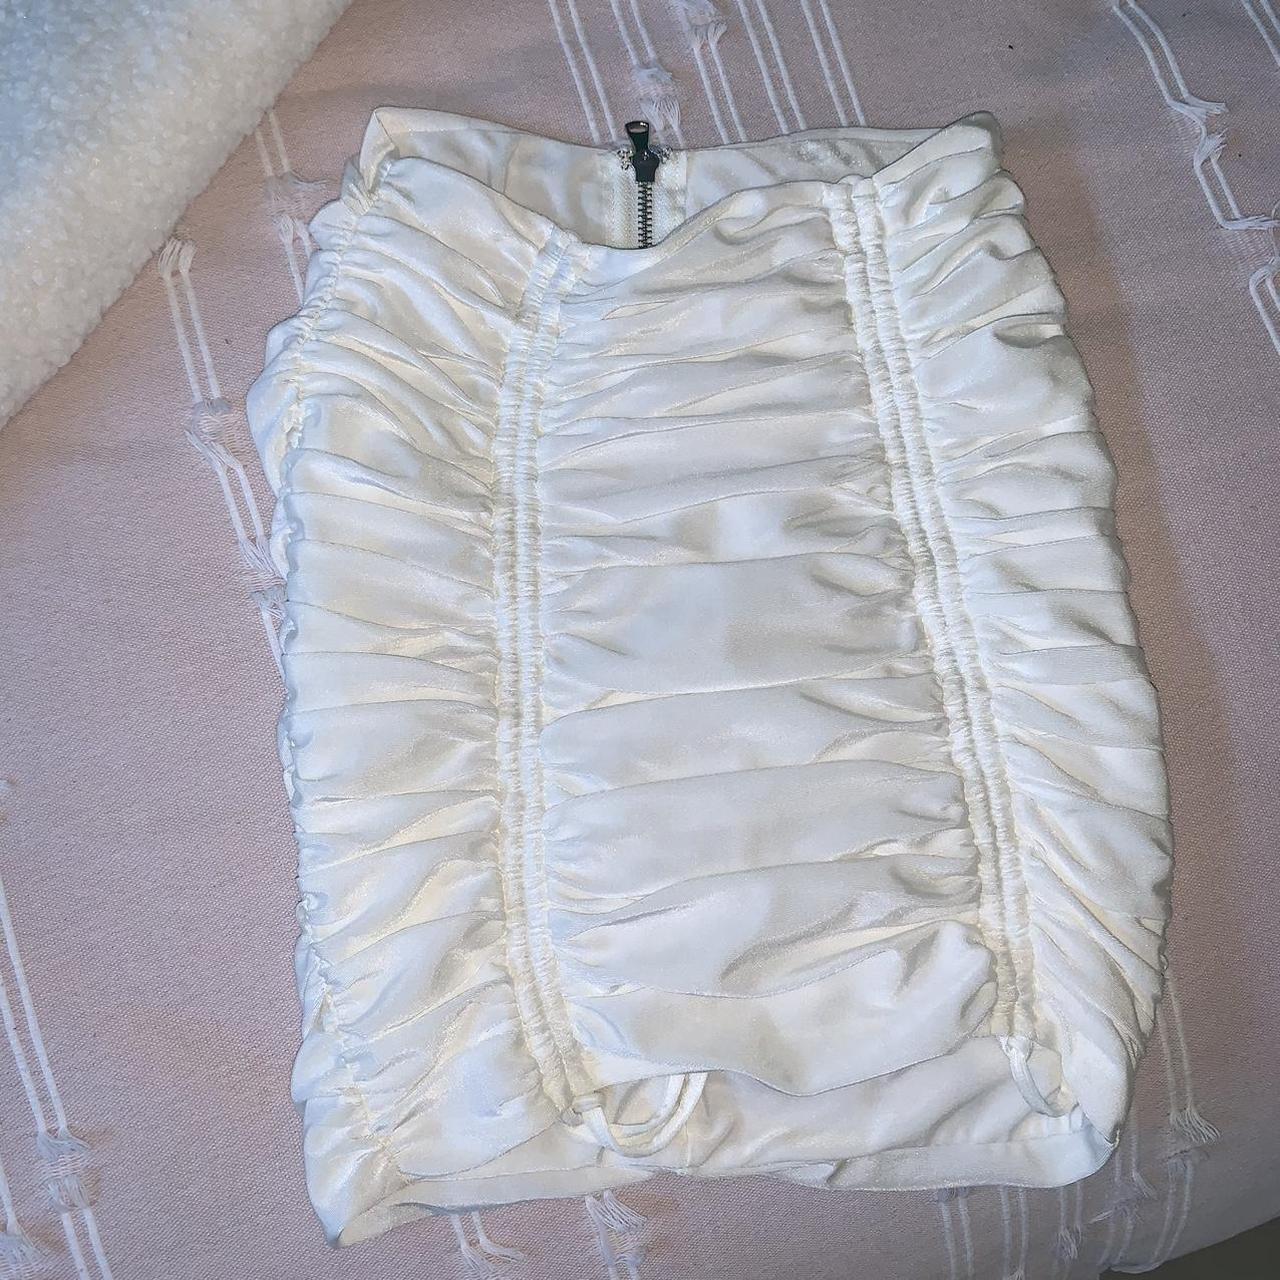 Tiger Mist white ruched skirt in XS (Worn only once) - Depop